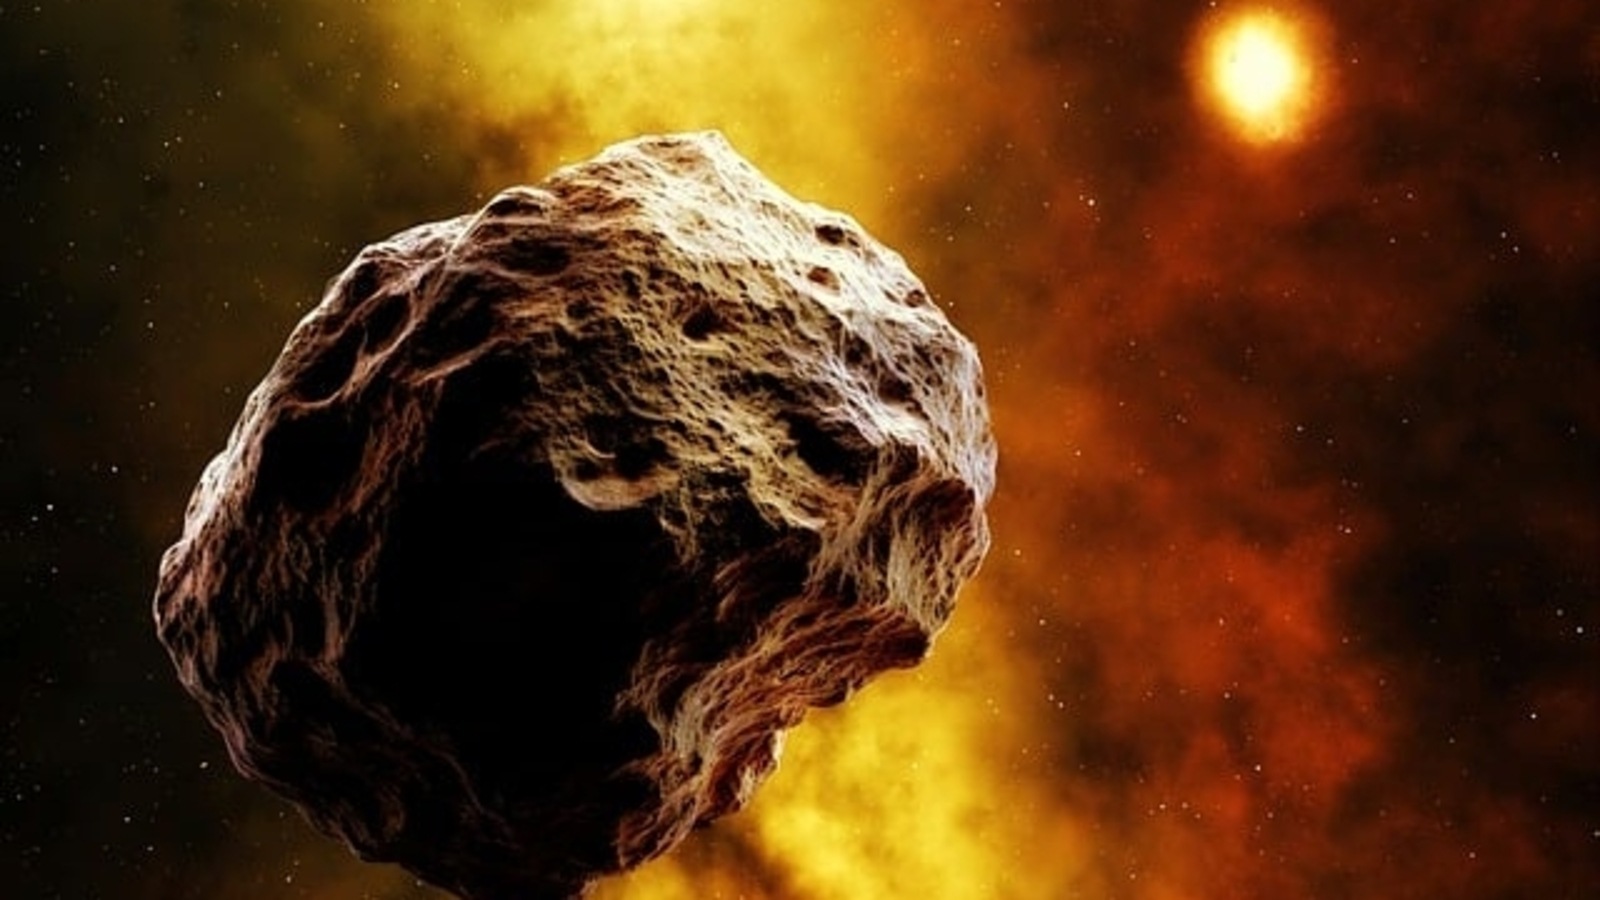 48-foot asteroid to get very close to Earth today, NASA says